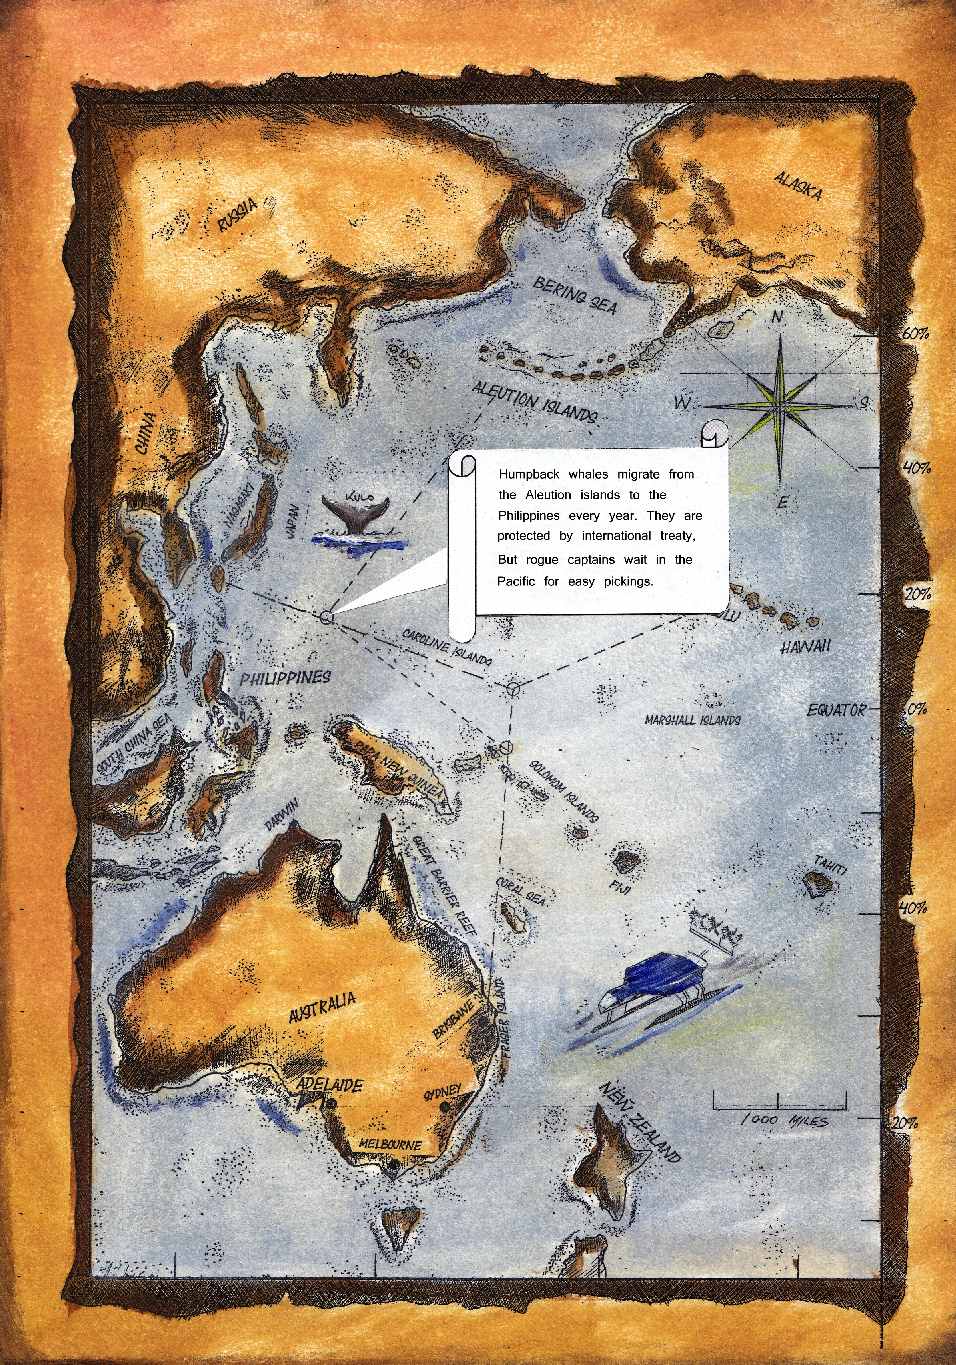 Kulo Luna adventure story Map of the Pacific Ocean whaling chase